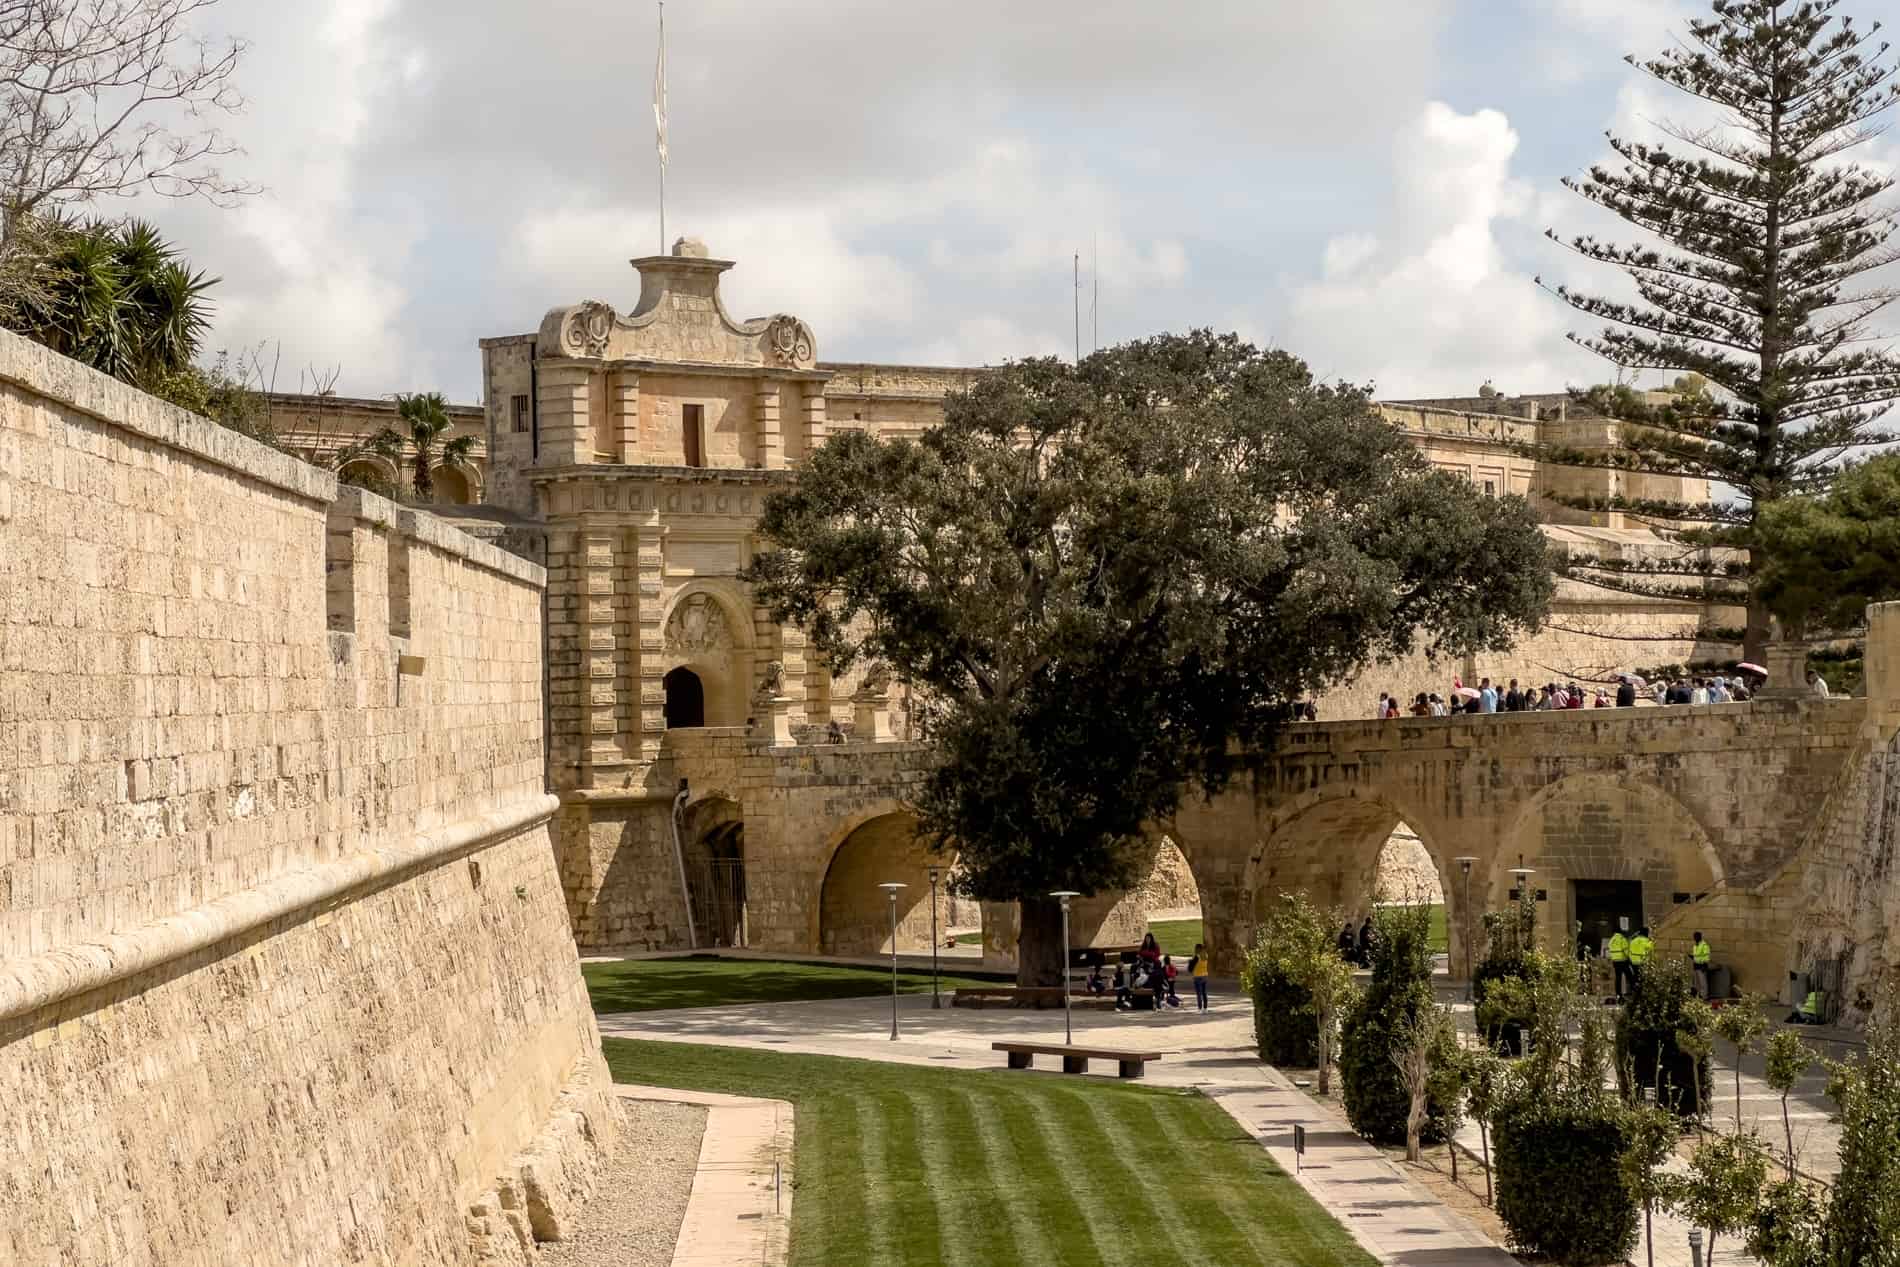 The honey-coloured stoned defensive walls and grand gate of the fortified city of Mdina, Malta. 